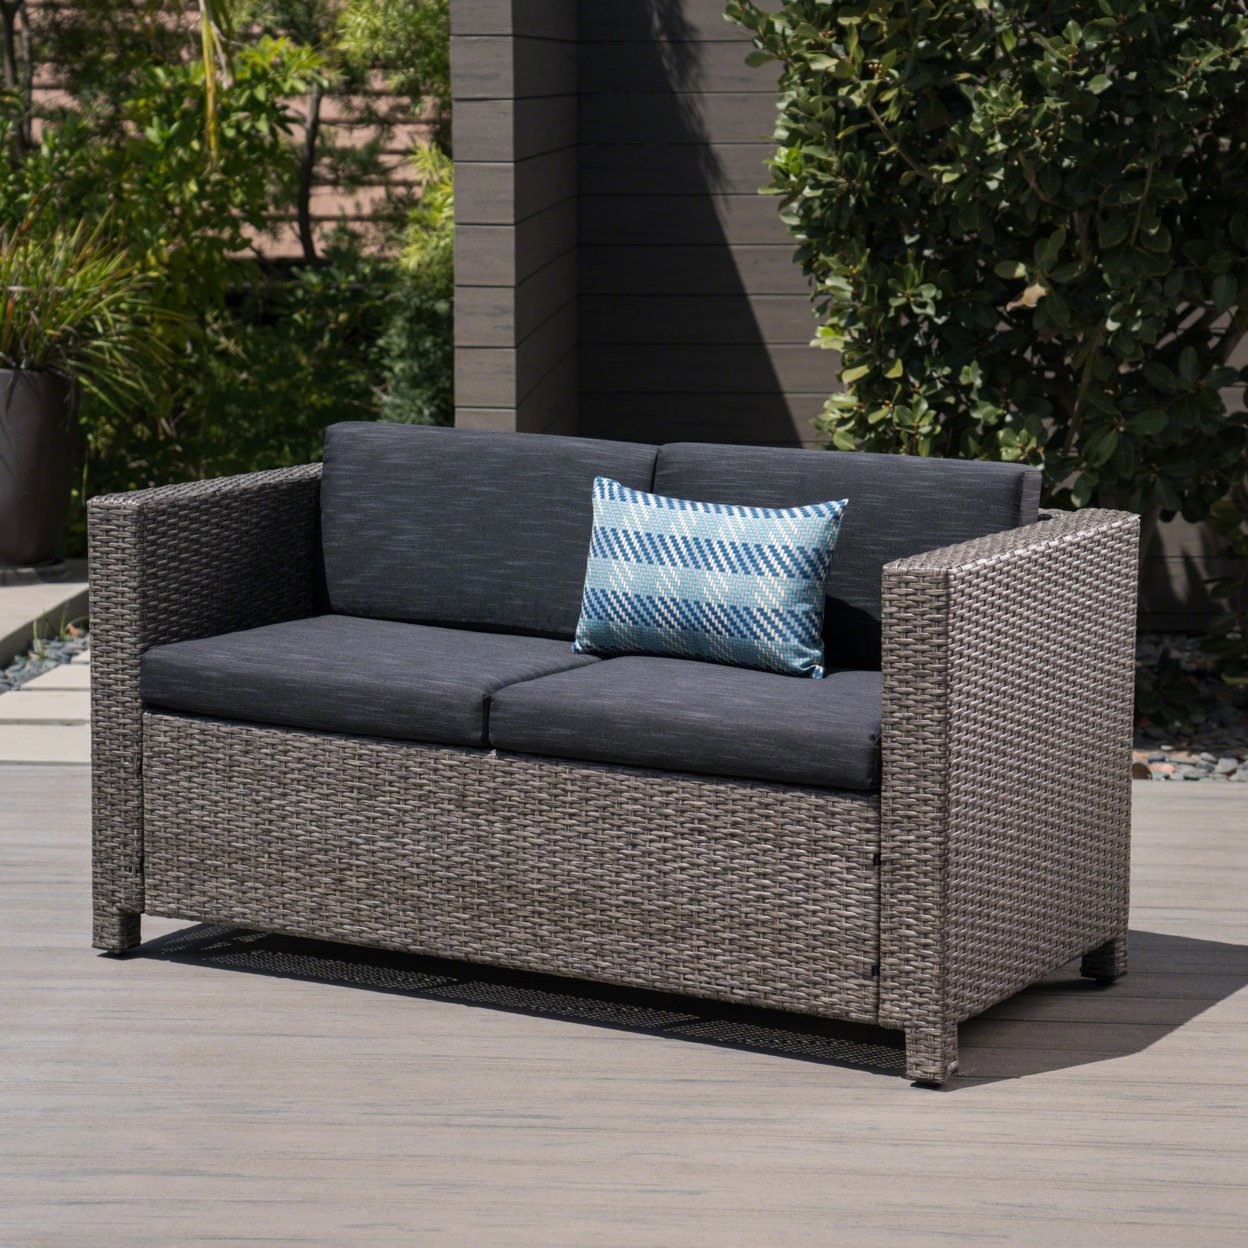 Lorelei Outdoor Wicker Loveseat With Water Resistant Cushions - Brown/Ceramic Gray